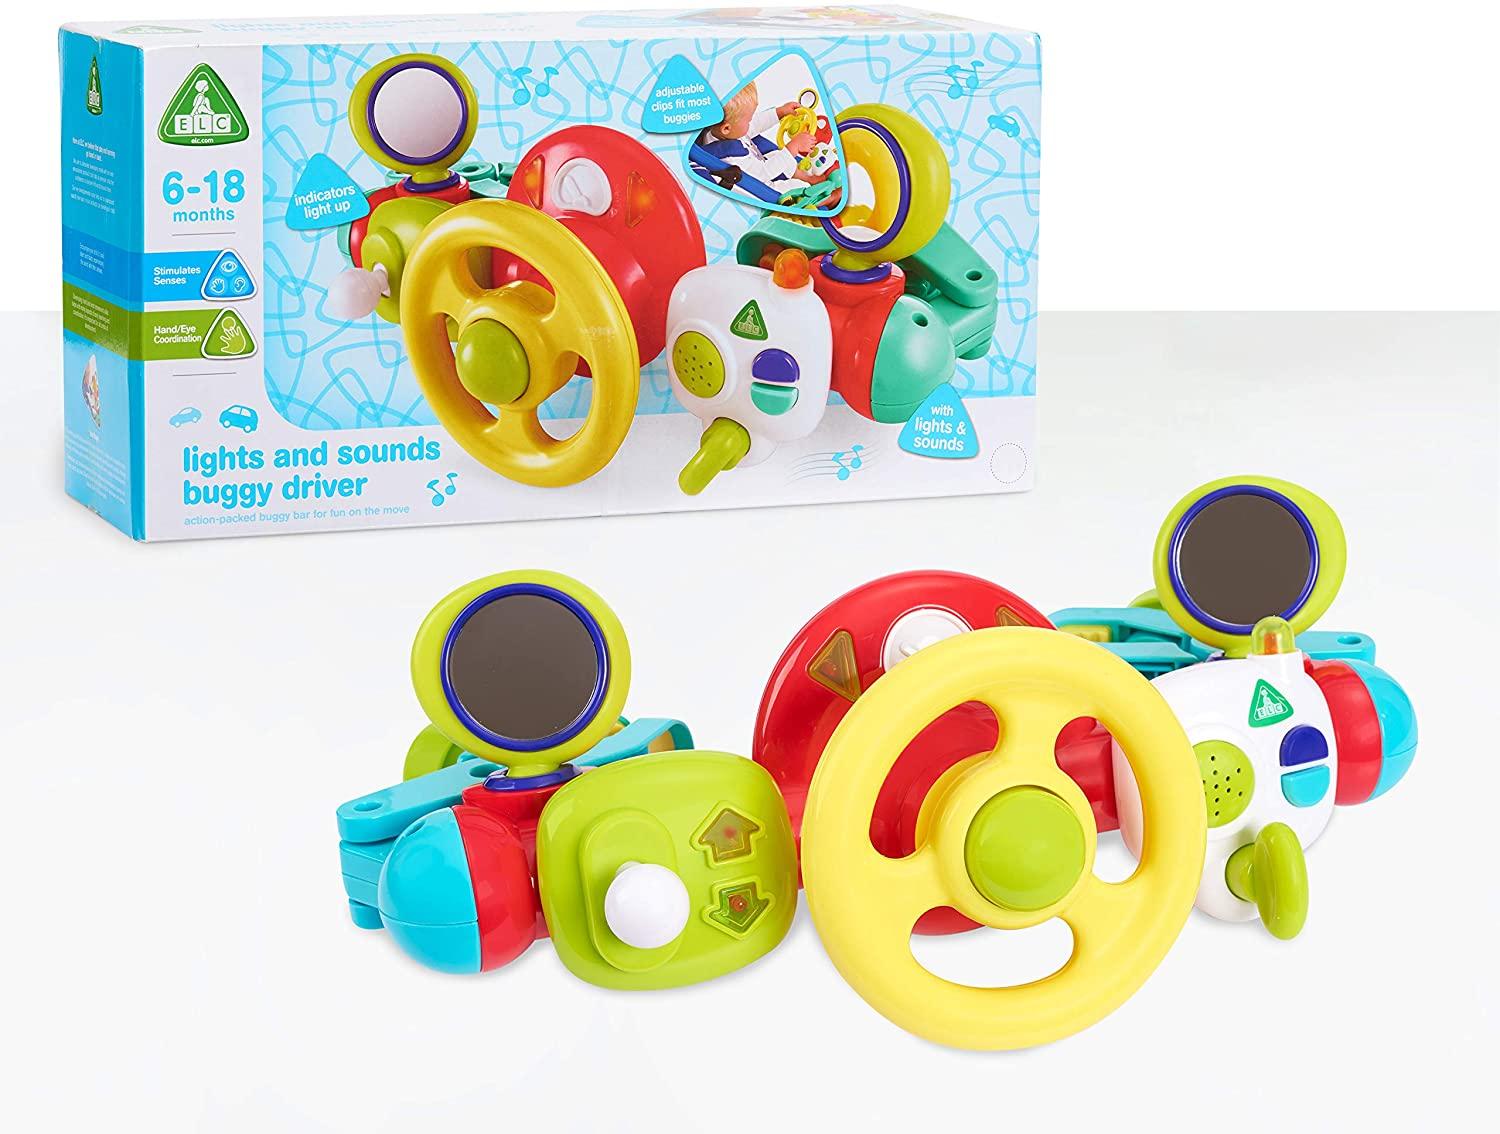 Early Learning Centre Lights and Sounds Buggy Driver Baby Toy for $9.16